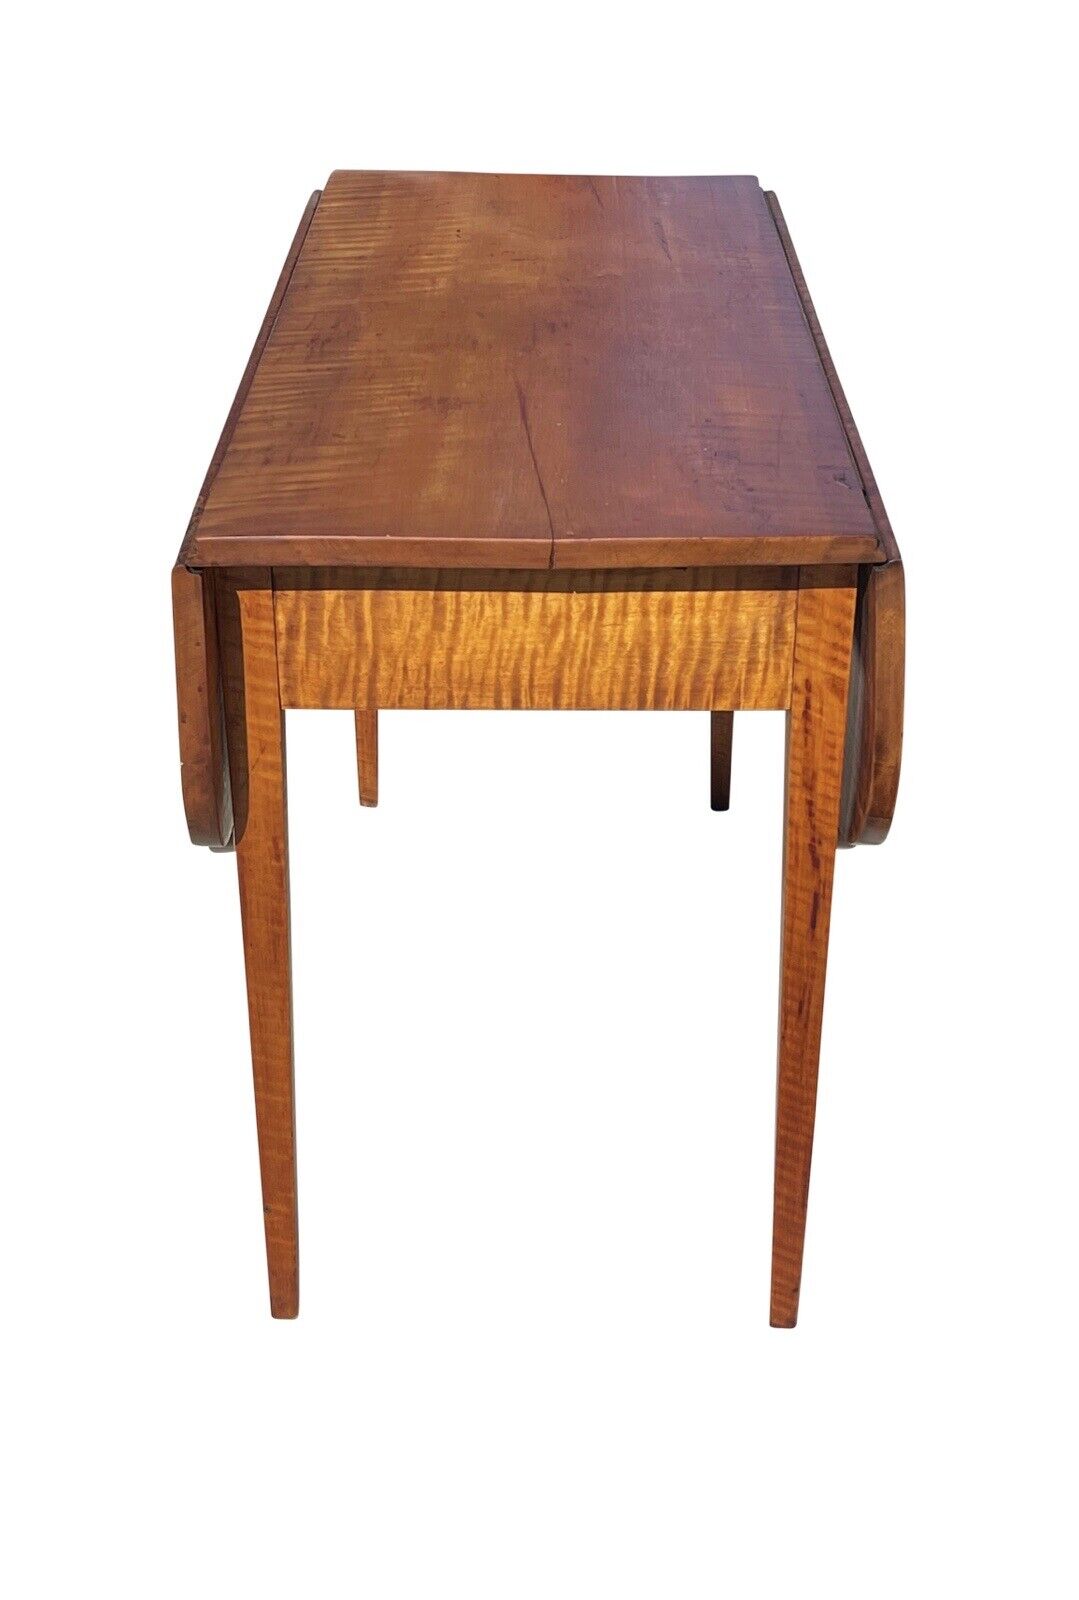 Antique Federal Period Hepplewhite Tiger Maple Drop Leaf Table With Ovolo Top